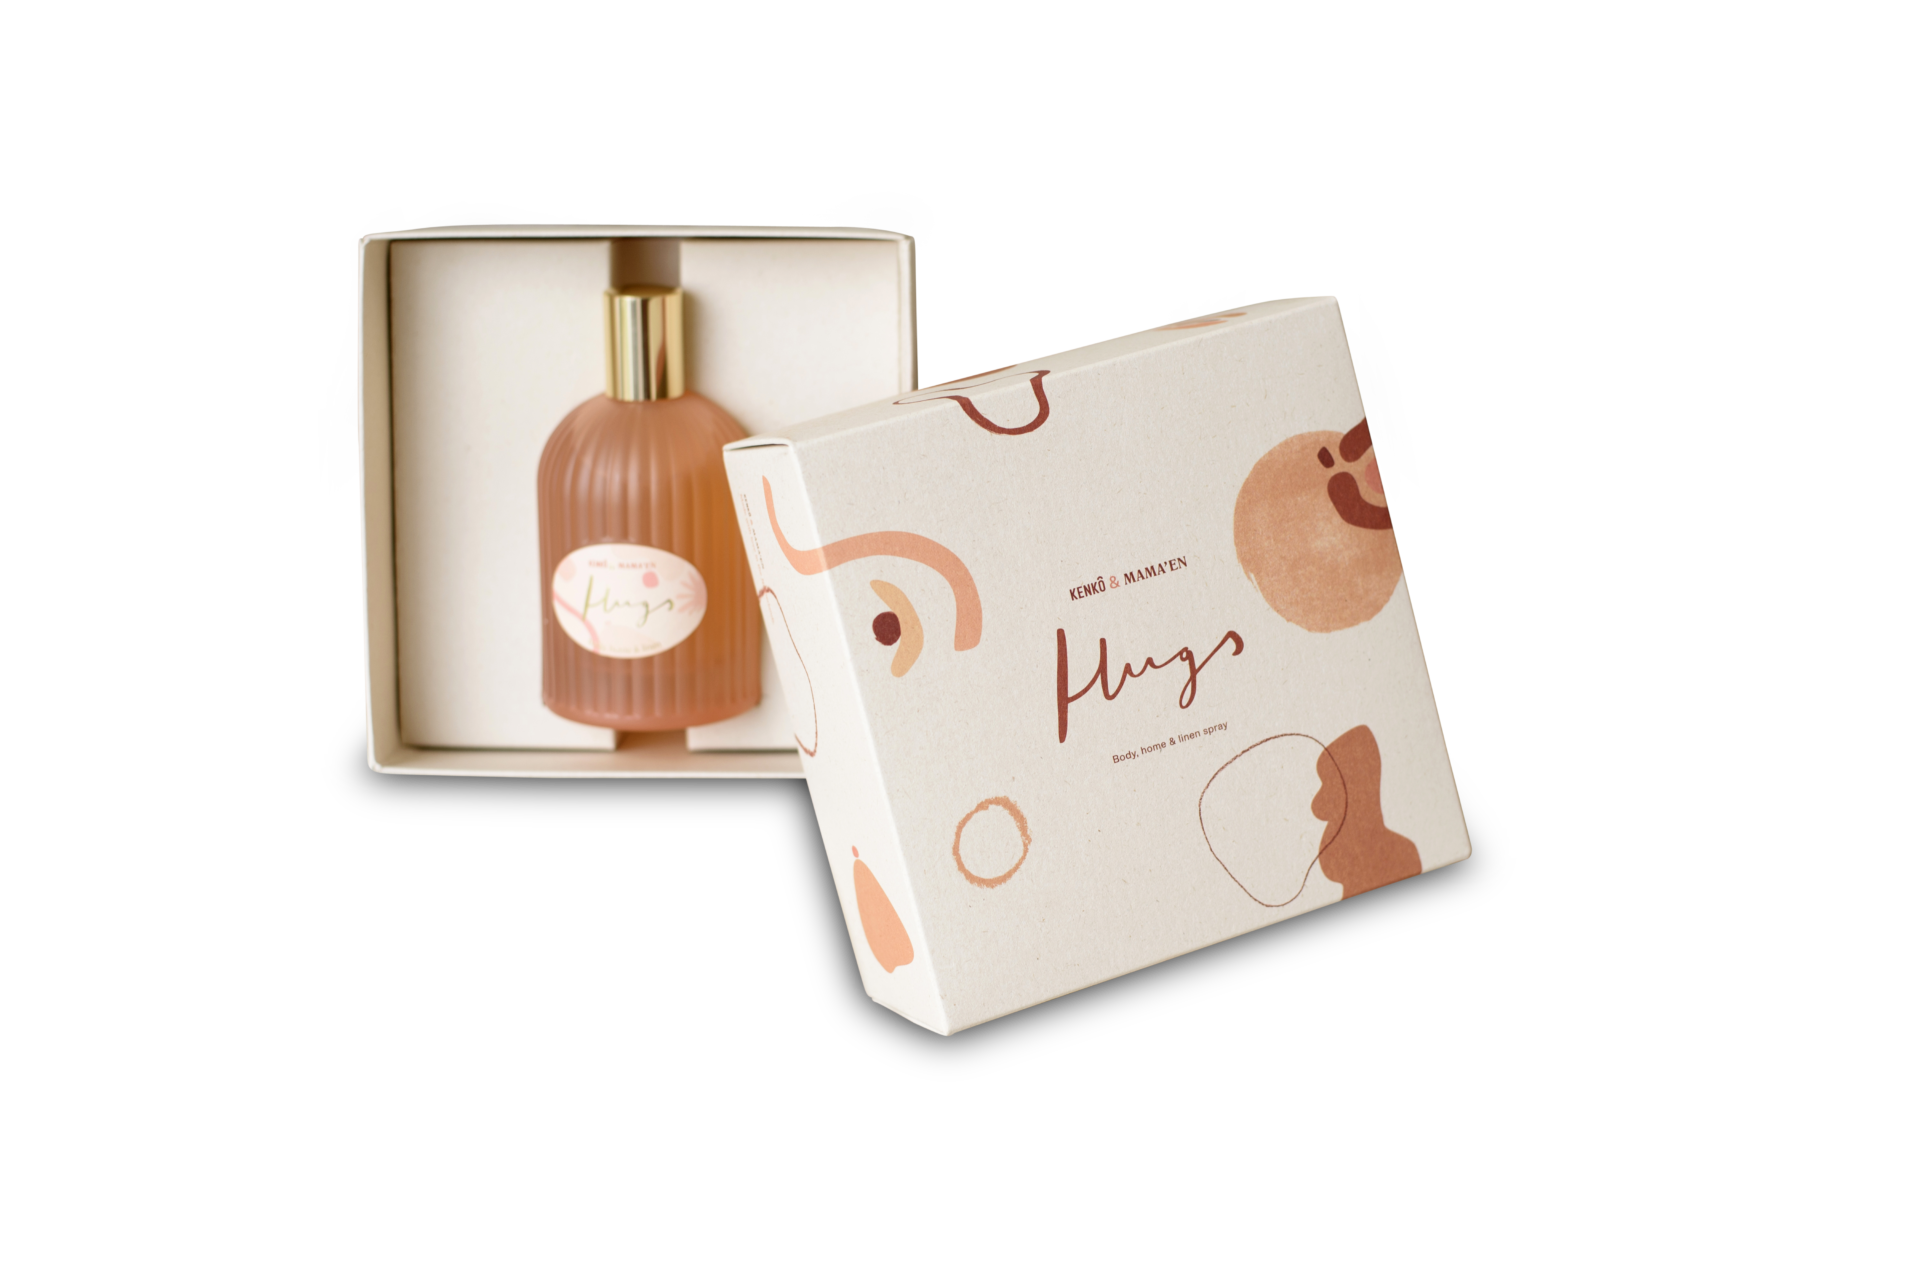 wp content uploads  0    0  natural care skincare eco packaging board cosmetics beauty kenkoskincare  c